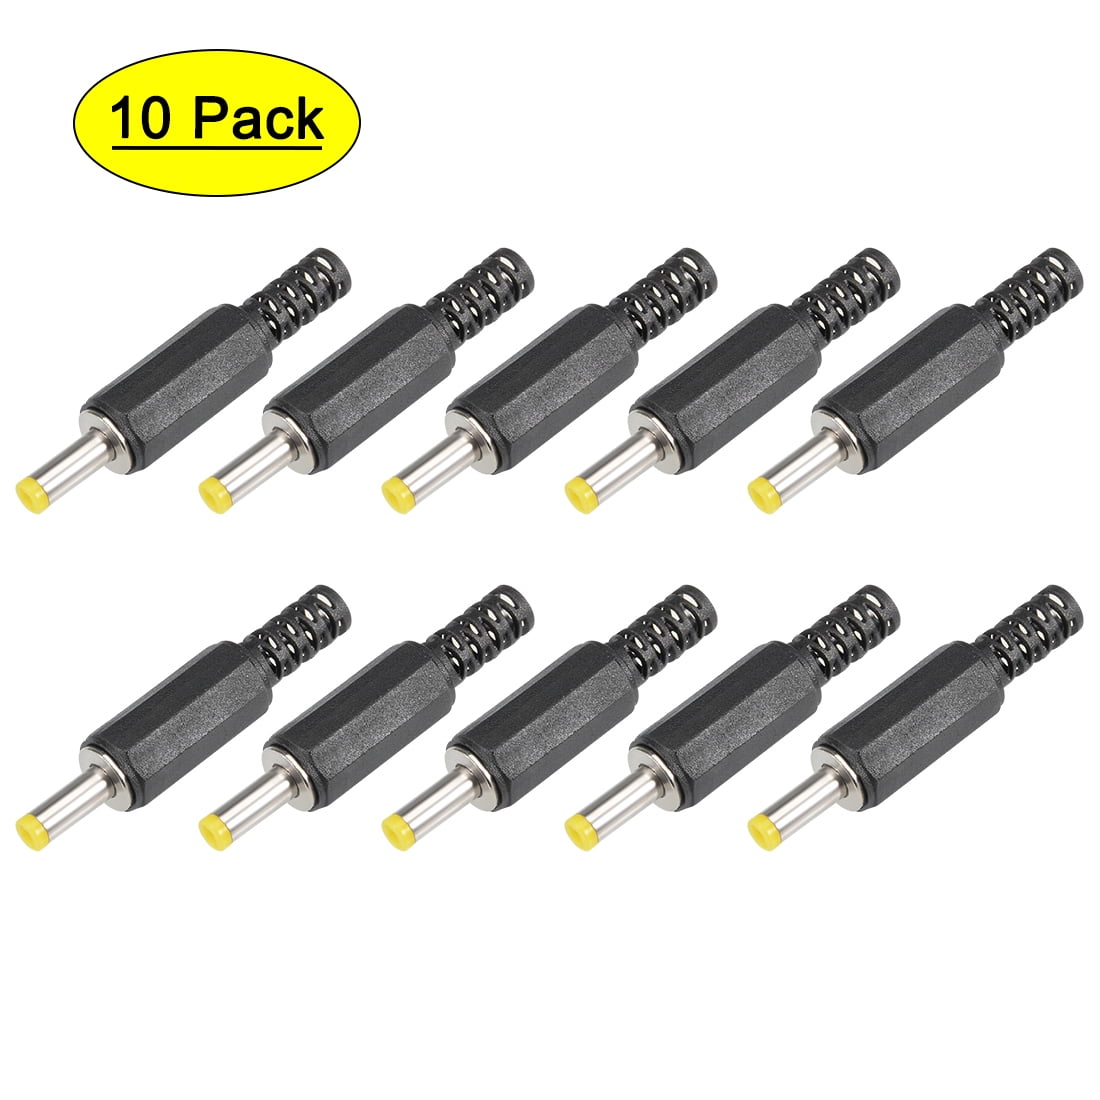 5pcs 4.0 X 1.7mm DC Power Plug Notebook cctv Cable NEW 